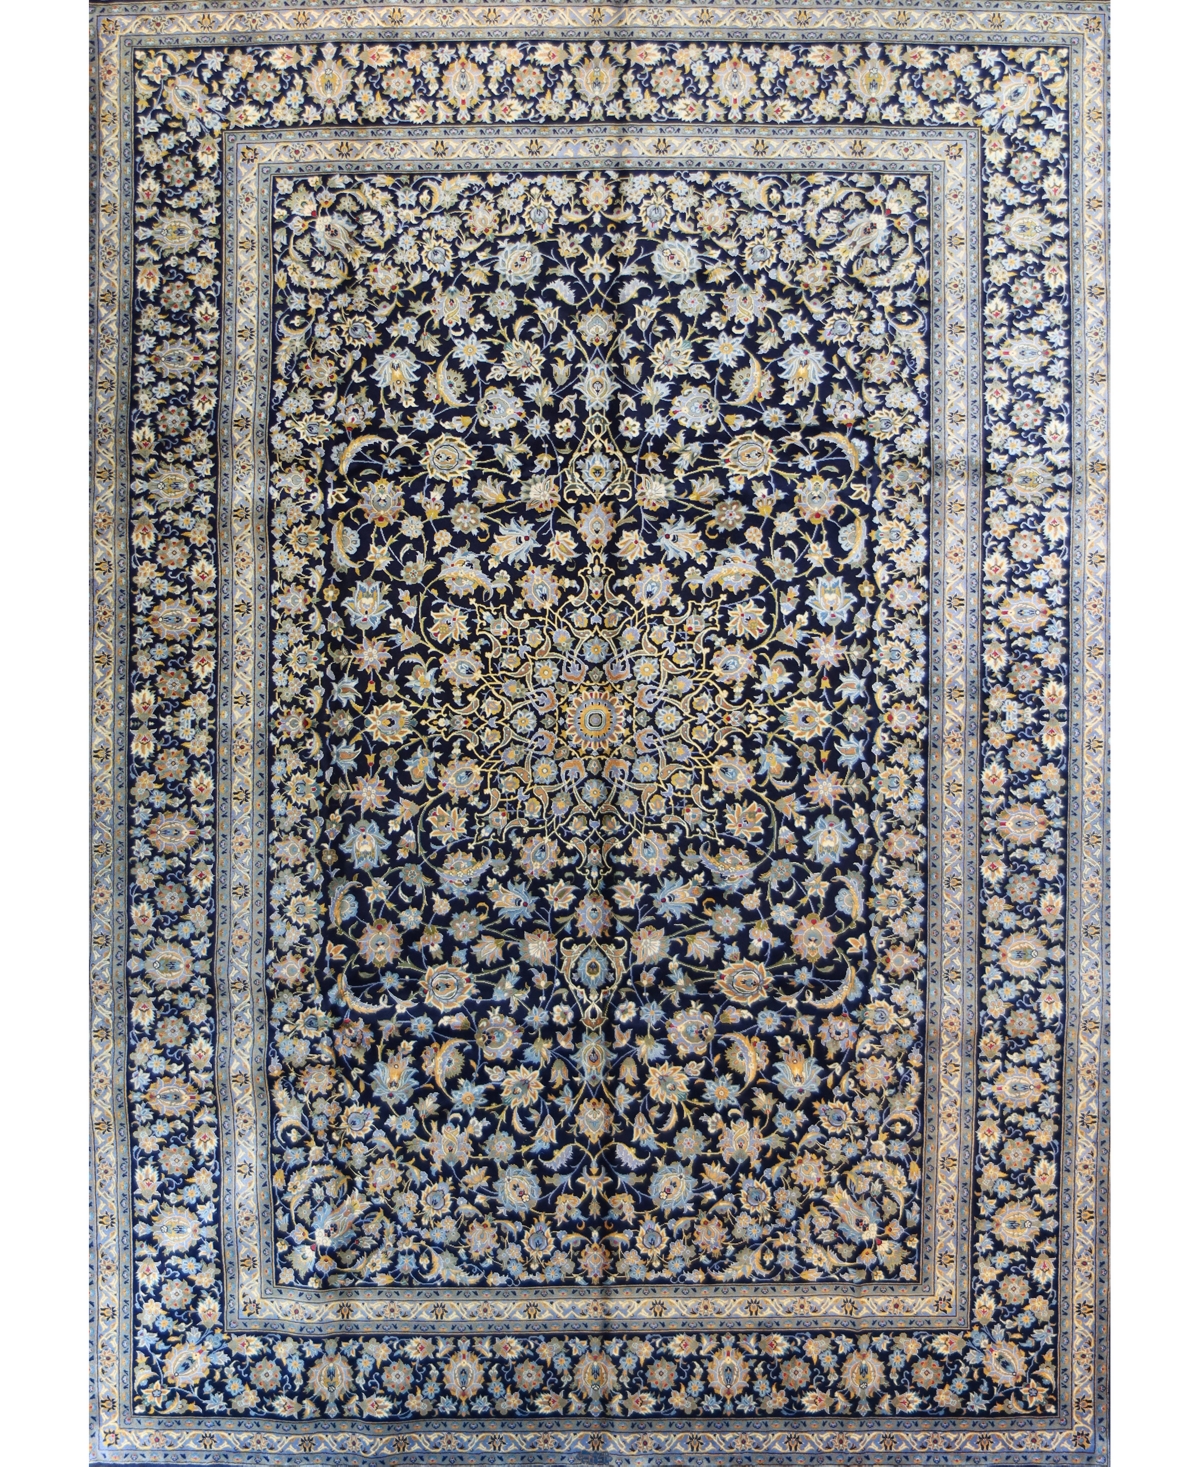 Bb Rugs One Of A Kind Kashan 626252 9'9" X 13'9" Area Rug In Navy